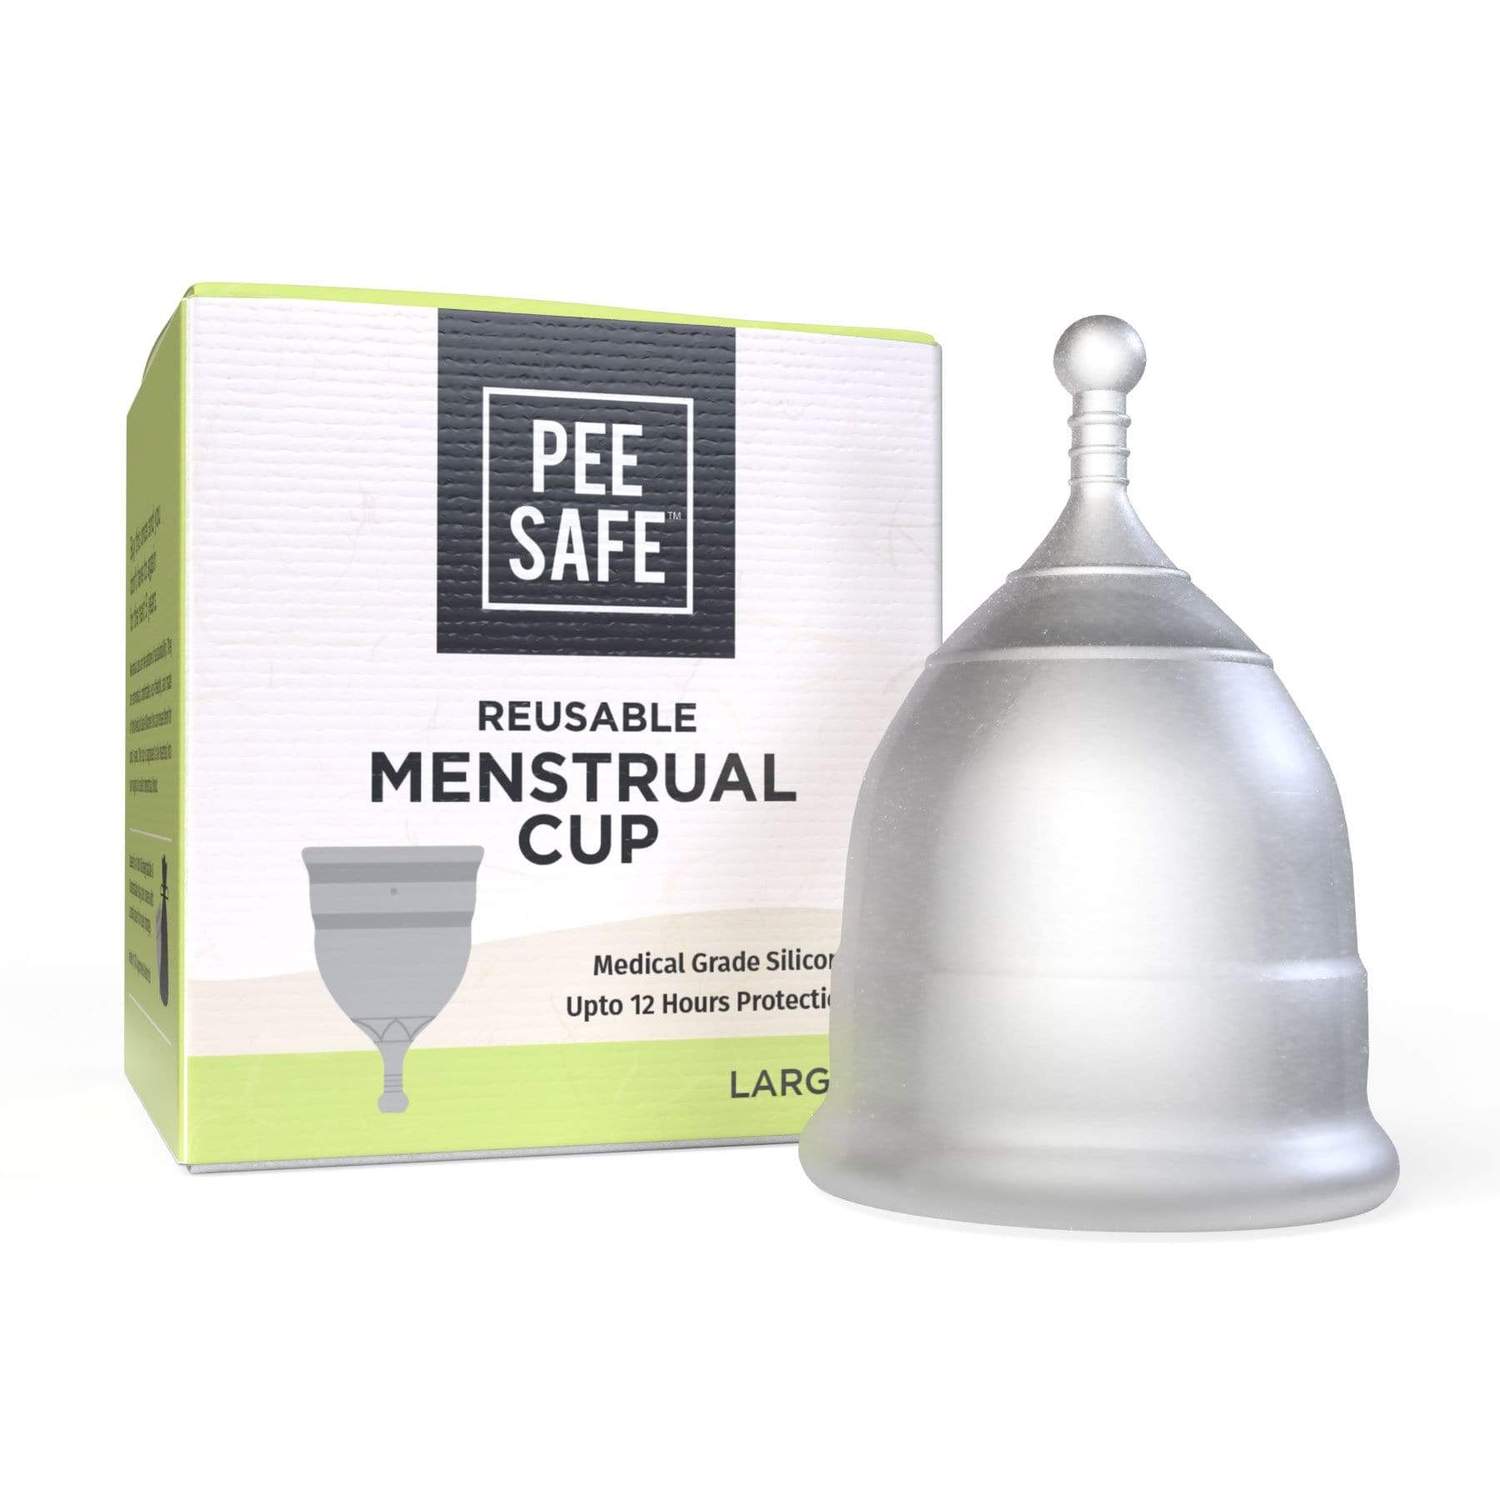 Pee Safe Reusable Menstrual Cup With Medical Grade Silcone For Women - Large 